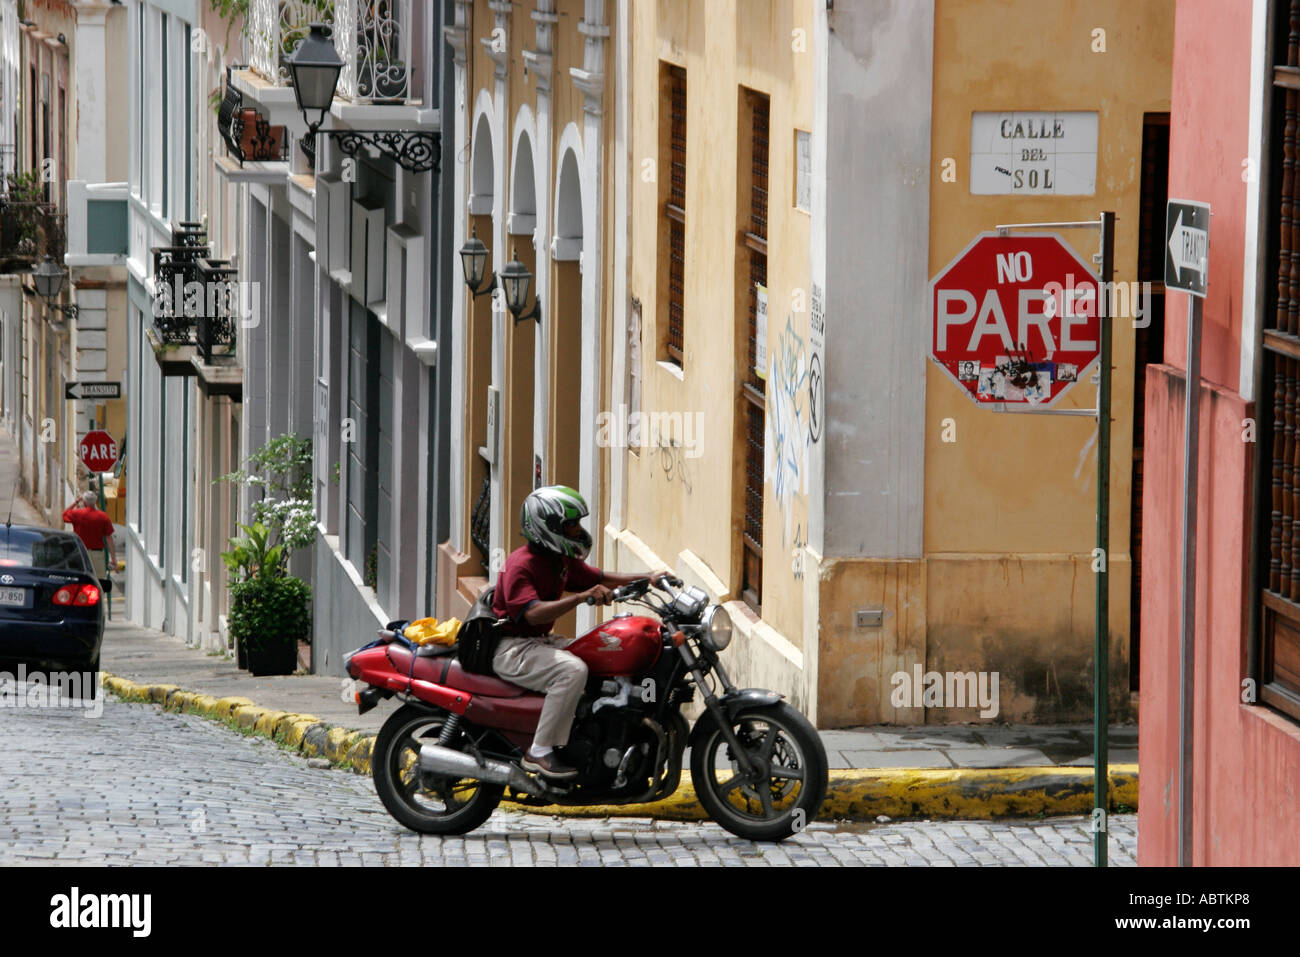 Puerto Rico,Rican,Caribbean Island,Greater Antilles Old San Juan,capital city,Calle del Sol,architecture,architectural,steep hill,motorcycle motorcycl Stock Photo